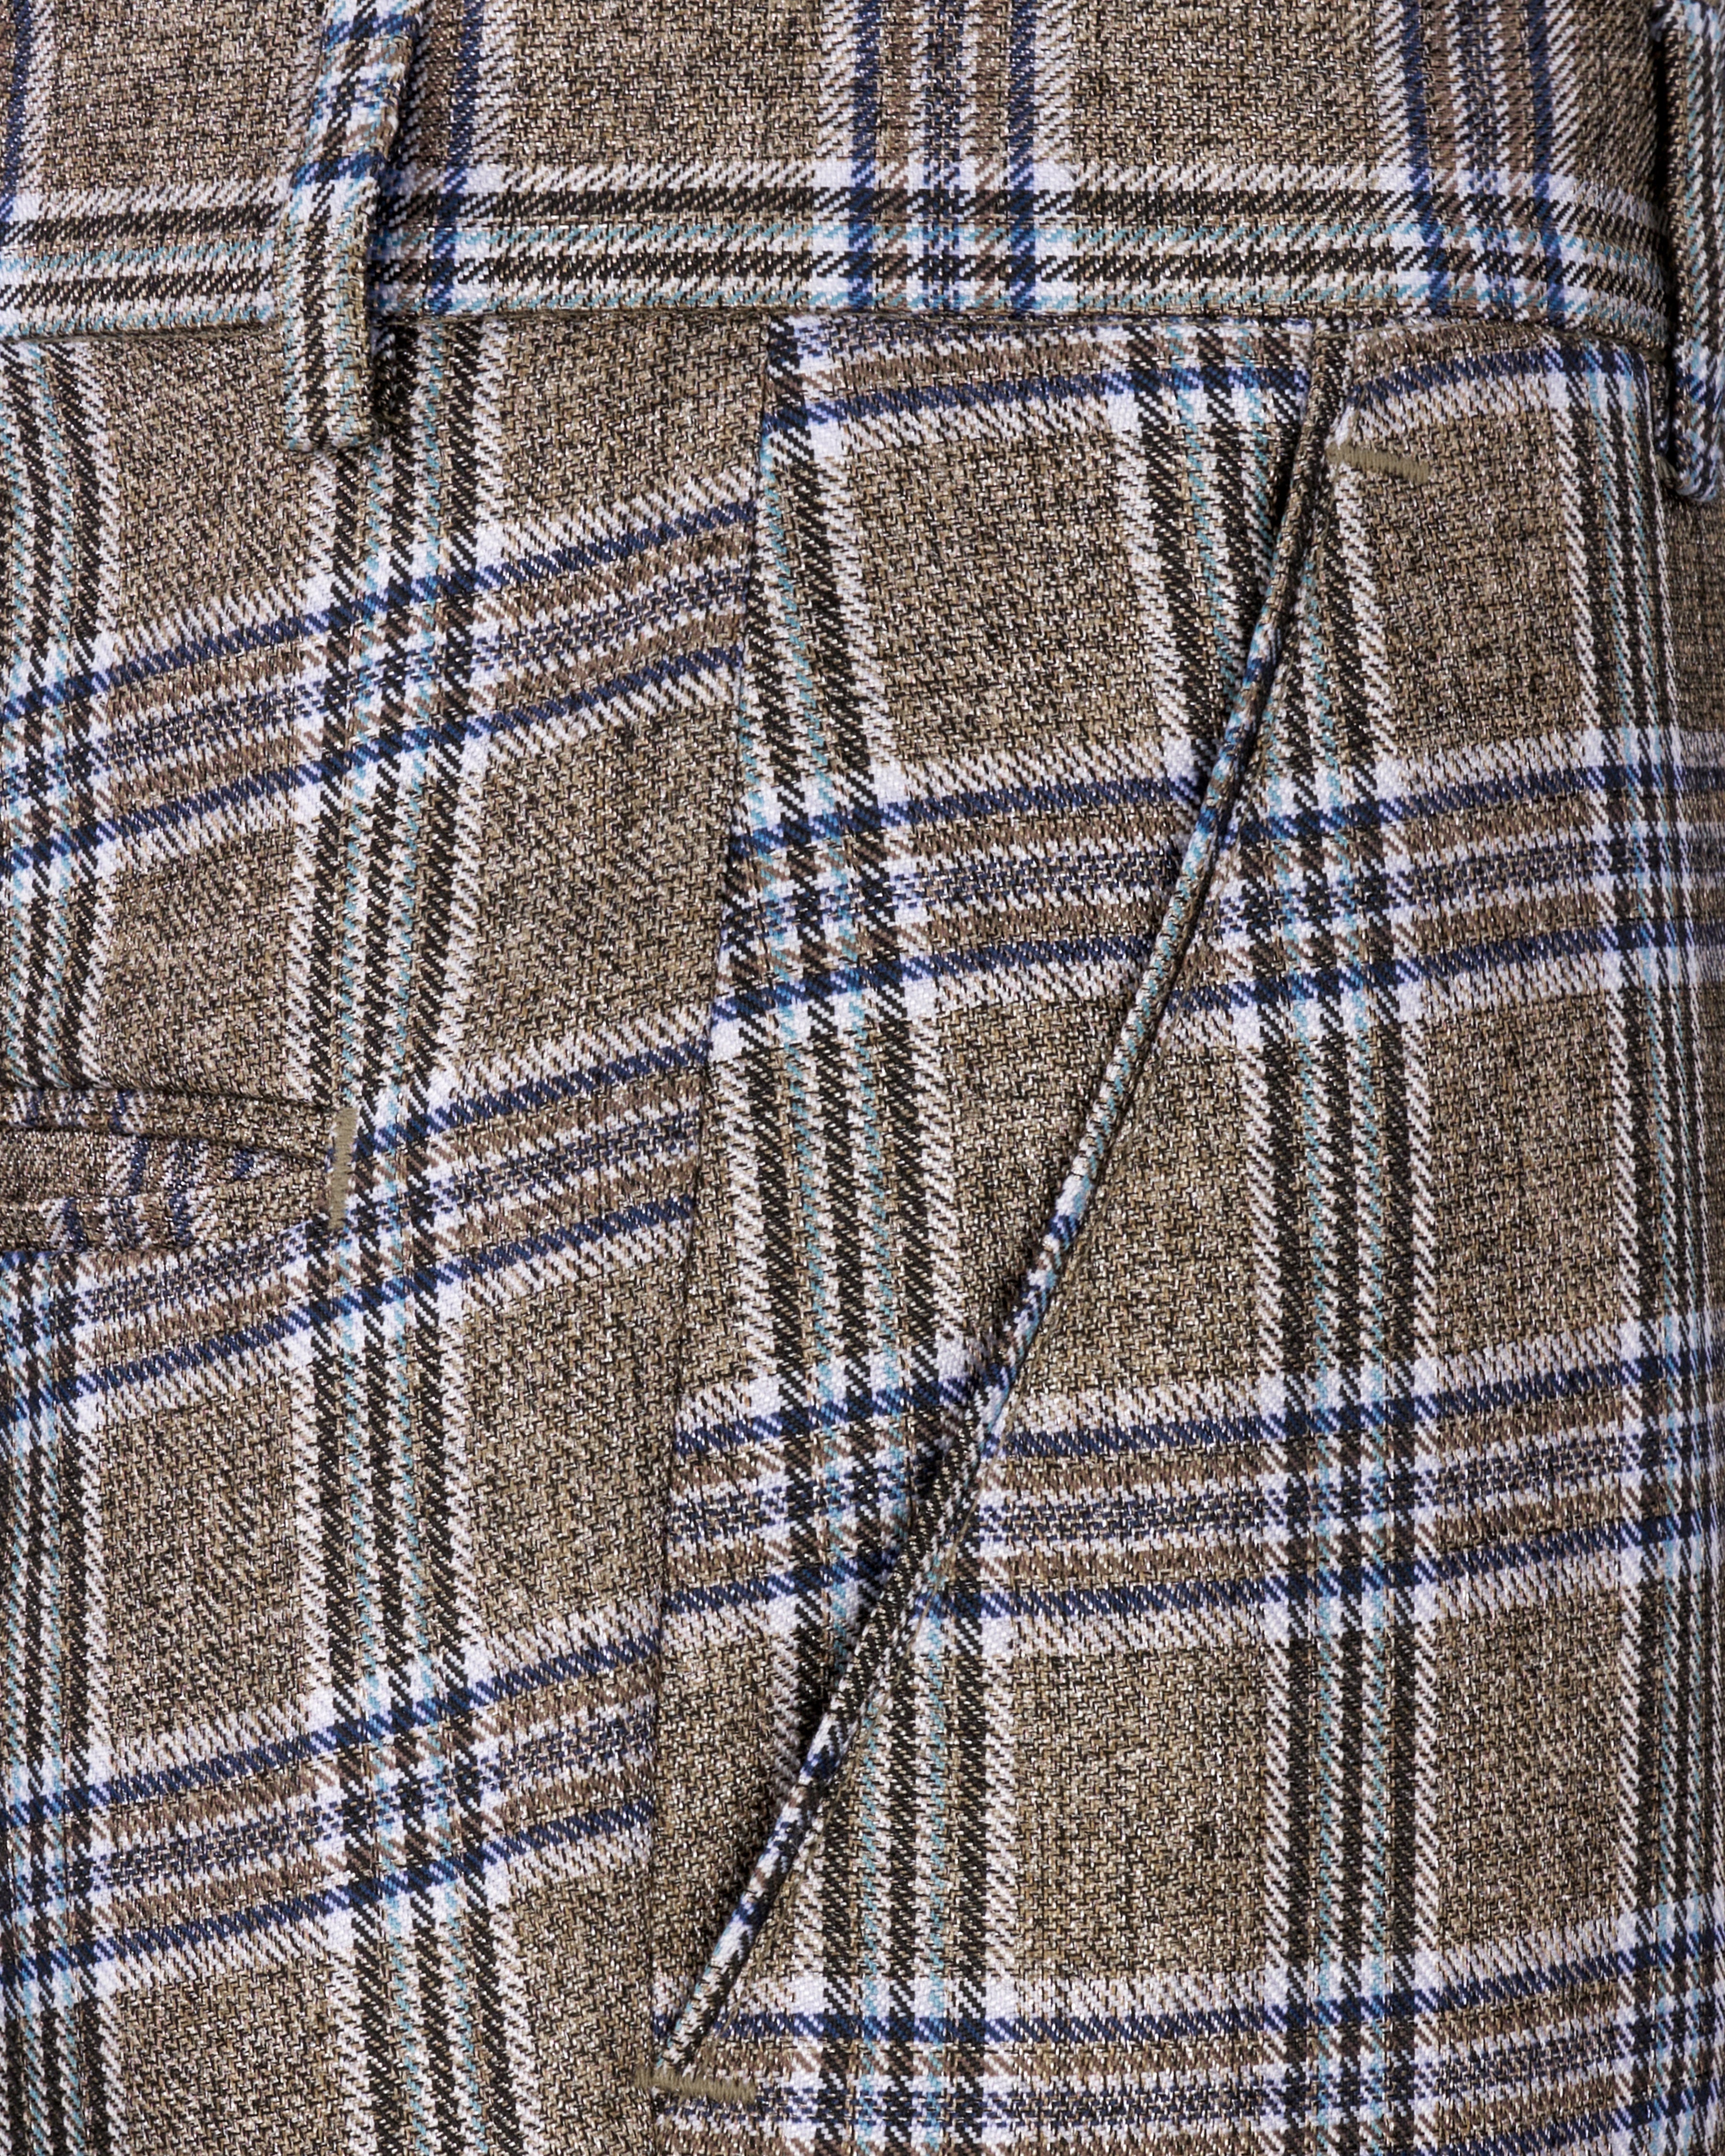 Shadow Brown with Rhino Blue Plaid Double Breasted Trench Coat With Pants TCPT2307-D74-36, TCPT2307-D74-38, TCPT2307-D74-40, TCPT2307-D74-42, TCPT2307-D74-44, TCPT2307-D74-46, TCPT2307-D74-48, TCPT2307-D74-50, TCPT2307-D74-52, TCPT2307-D74-54, TCPT2307-D74-56, TCPT2307-D74-58, TCPT2307-D74-60